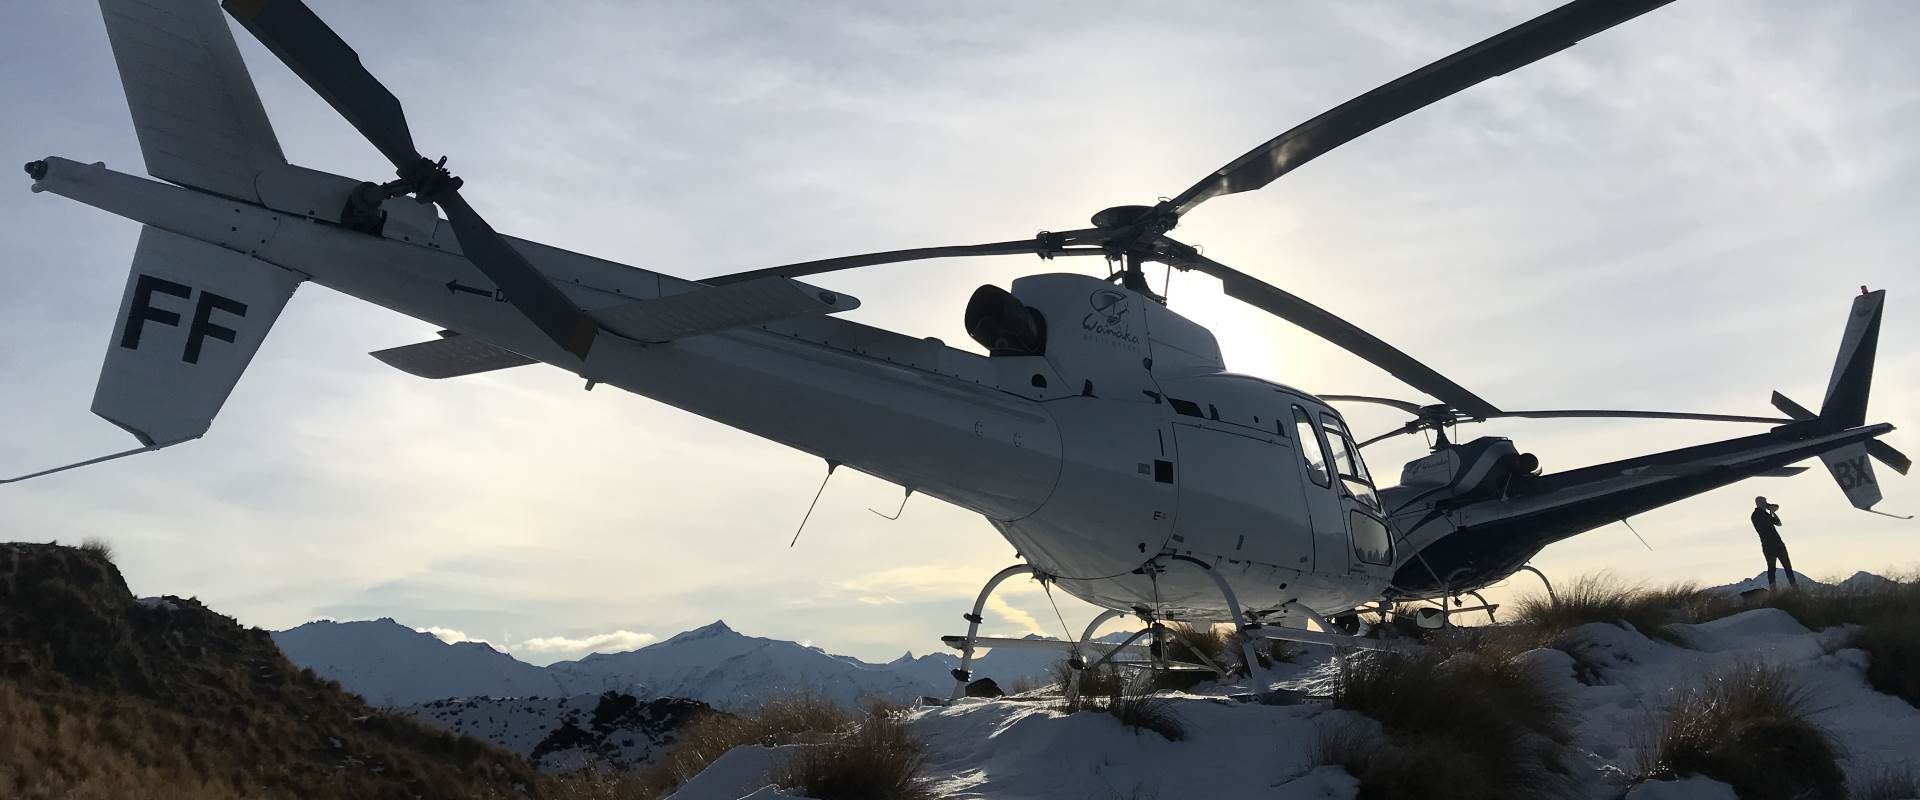 our-flee-wanaka-helicopters